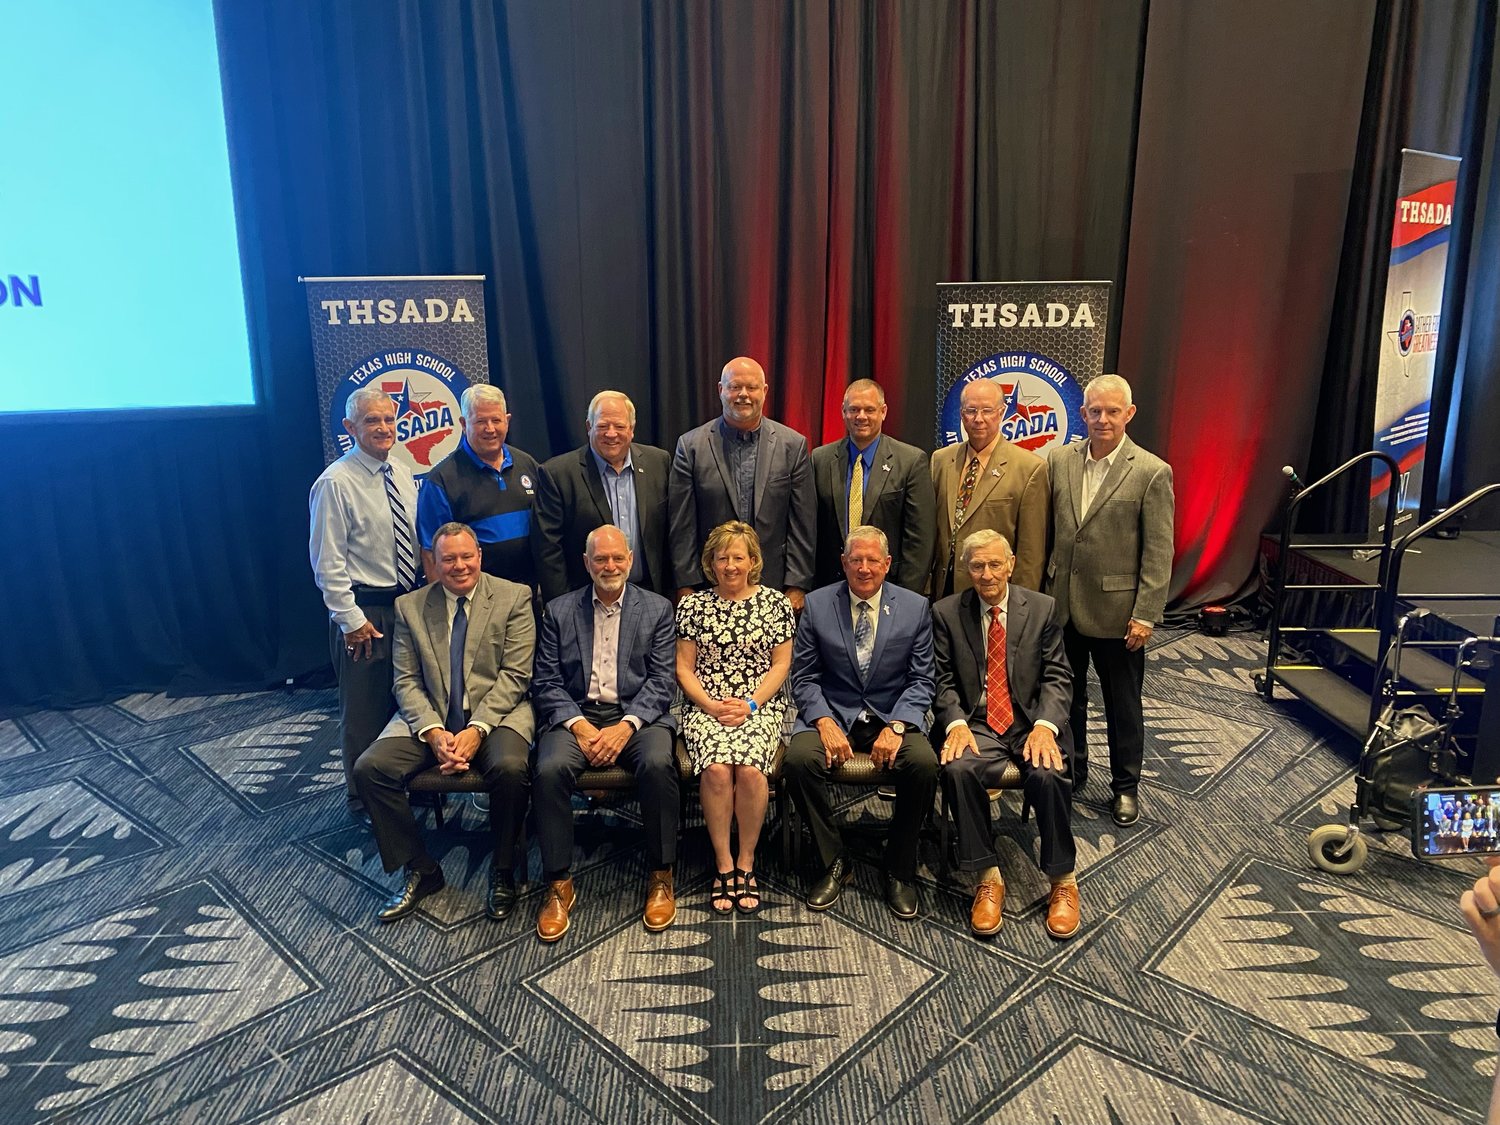 Katy ISD Athletic Director Debbie Decker is pictured along with the other THSADA Hall of Honor recipients.